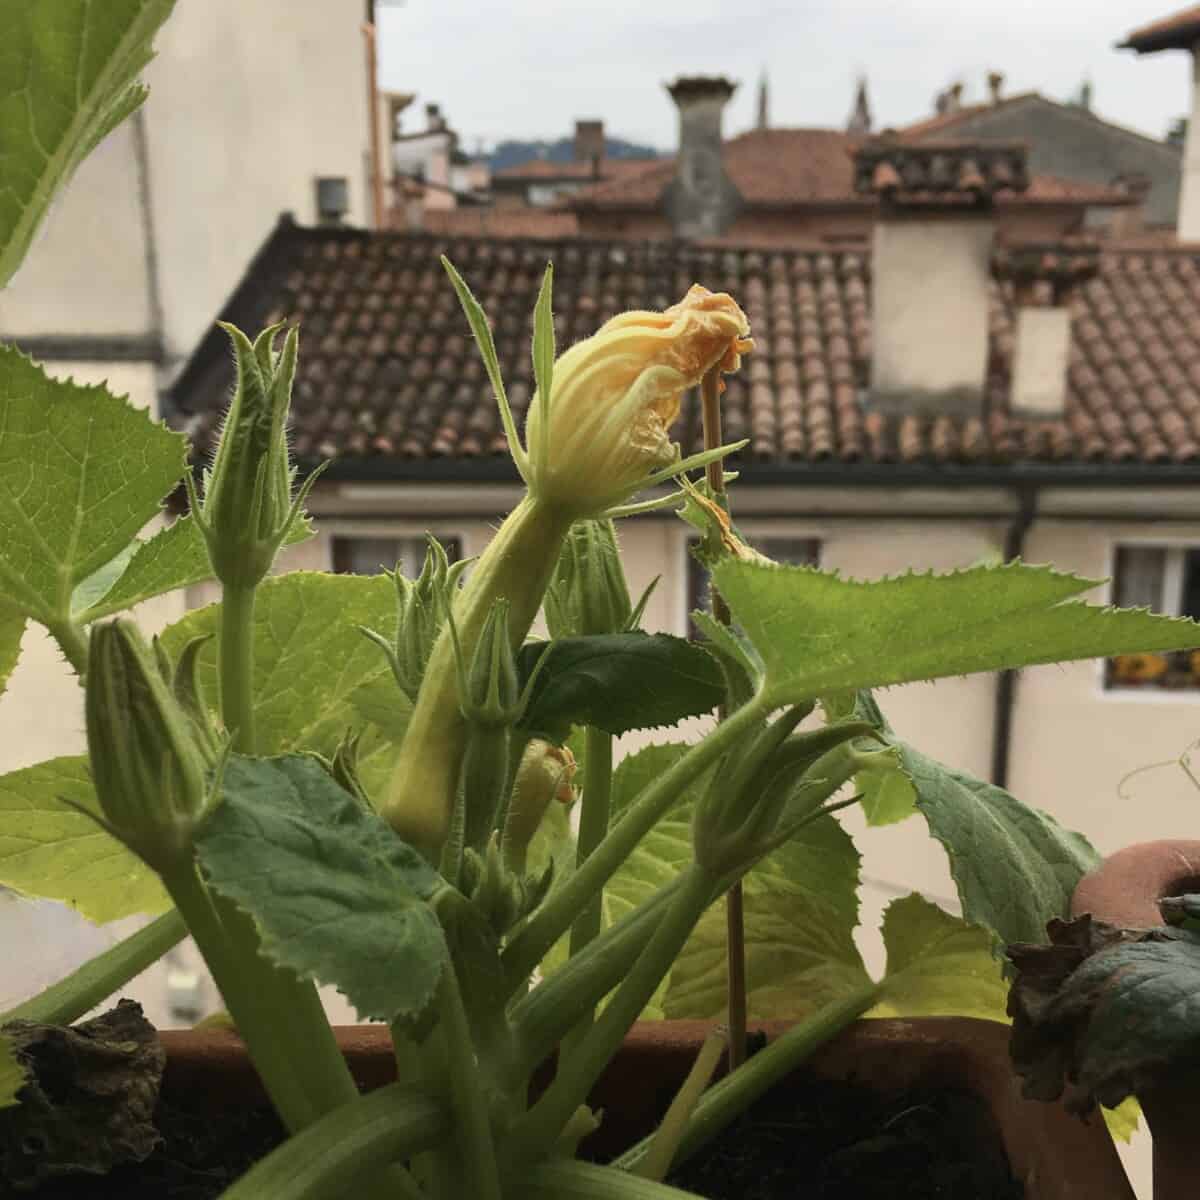 yellow squash blossoms on the vine growing out of my window box planters